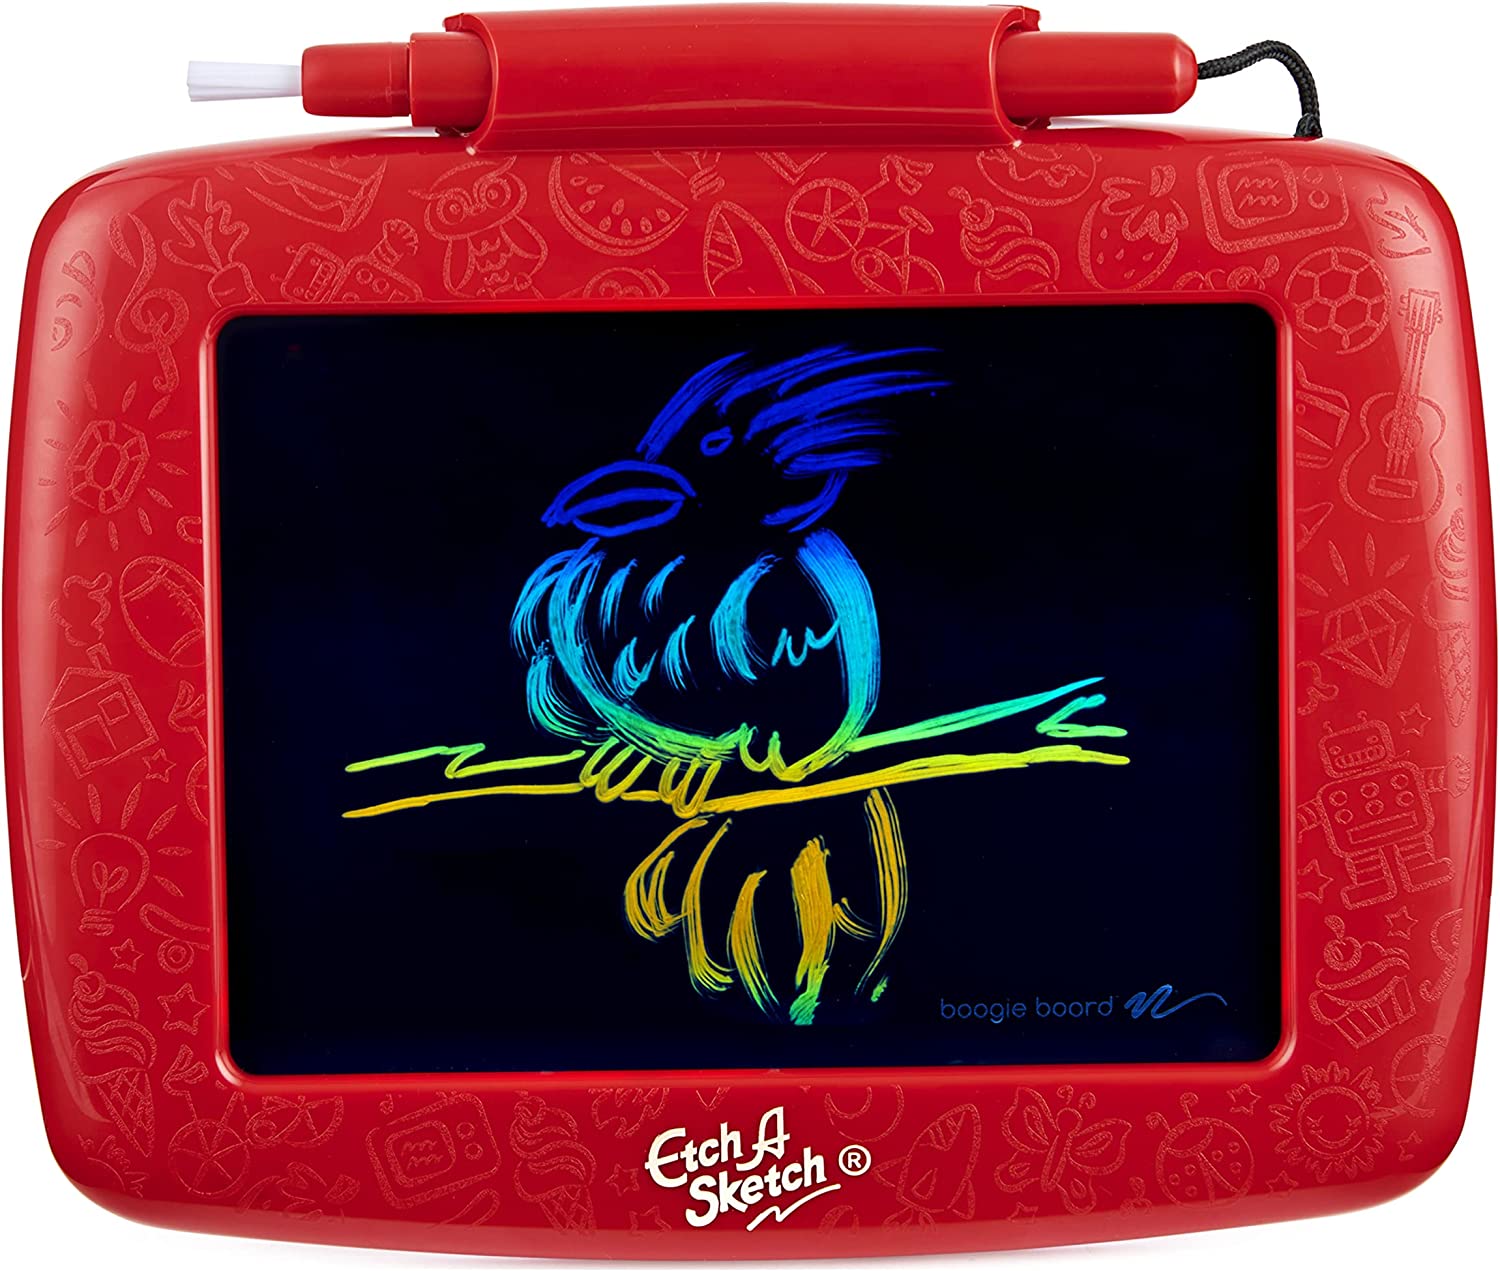 Etch A Sketch, Classic Red Drawing Toy with Magic Screen, for Ages 3 and Up